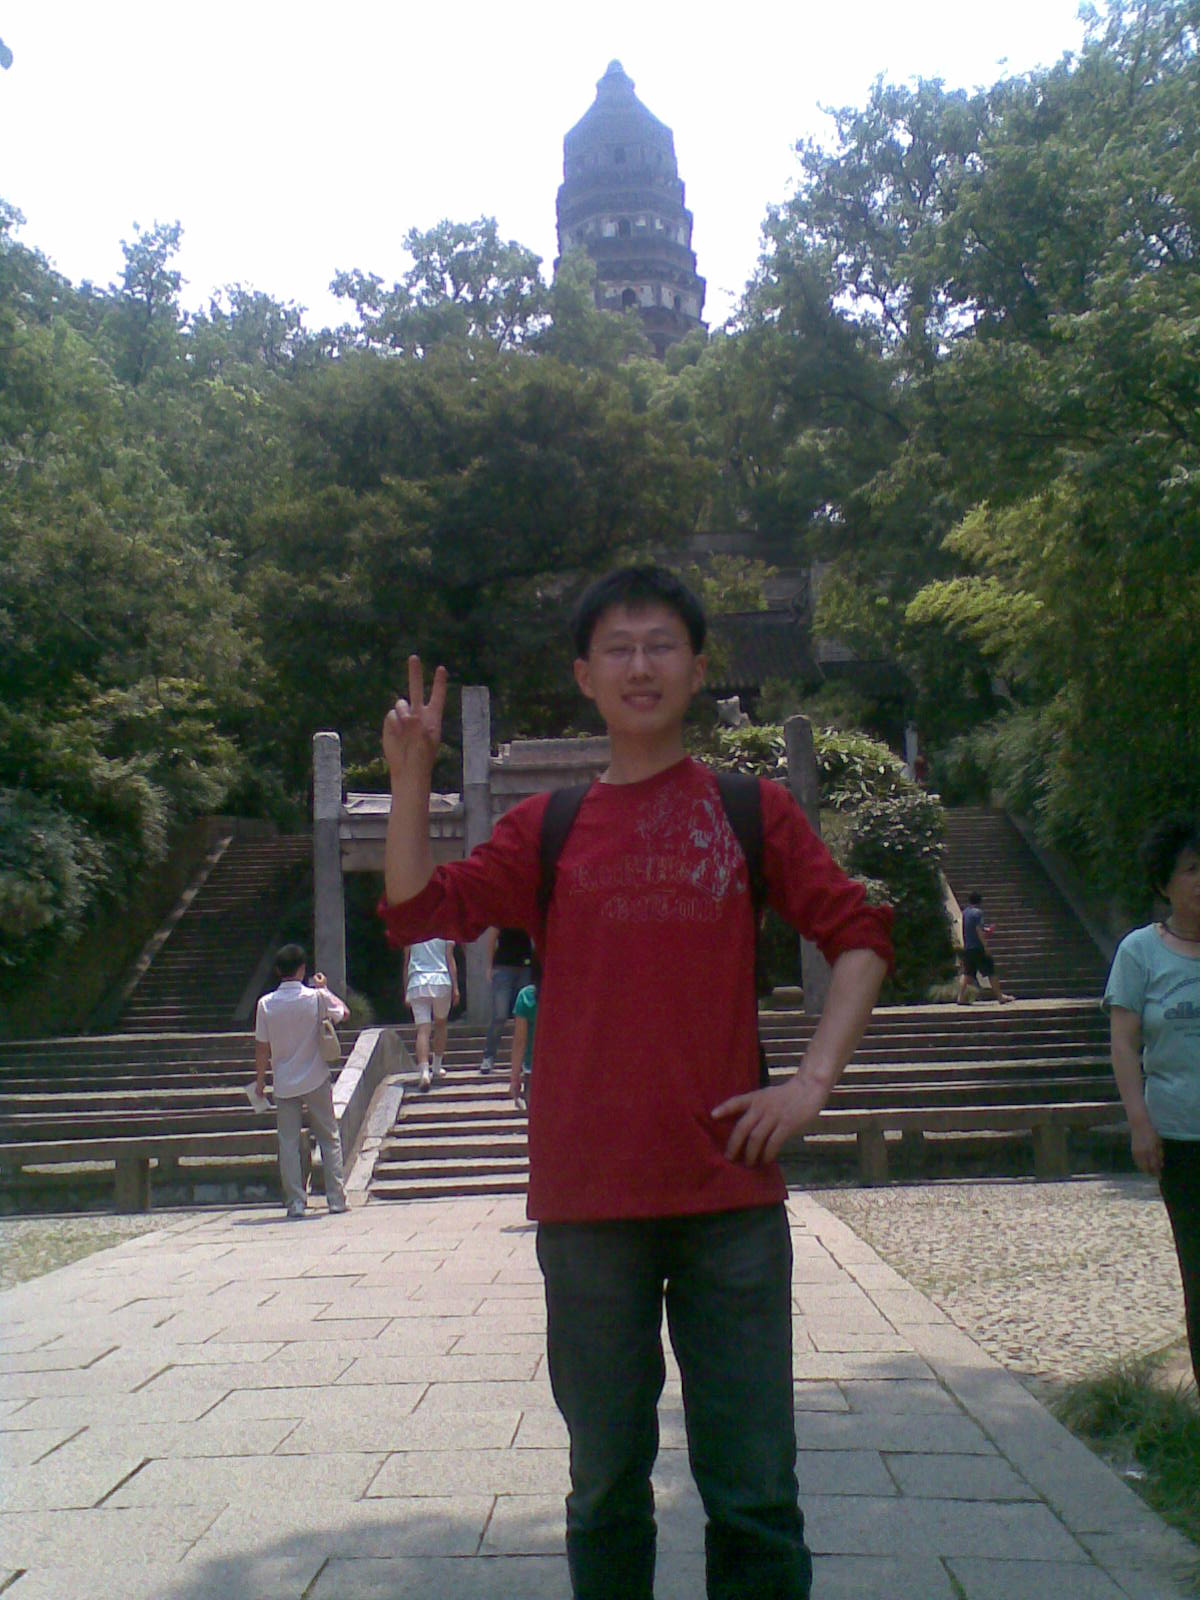 William on bicycle tour in Suzhou,  China   Tiger Hill  (虎丘) Pagoda in the background.